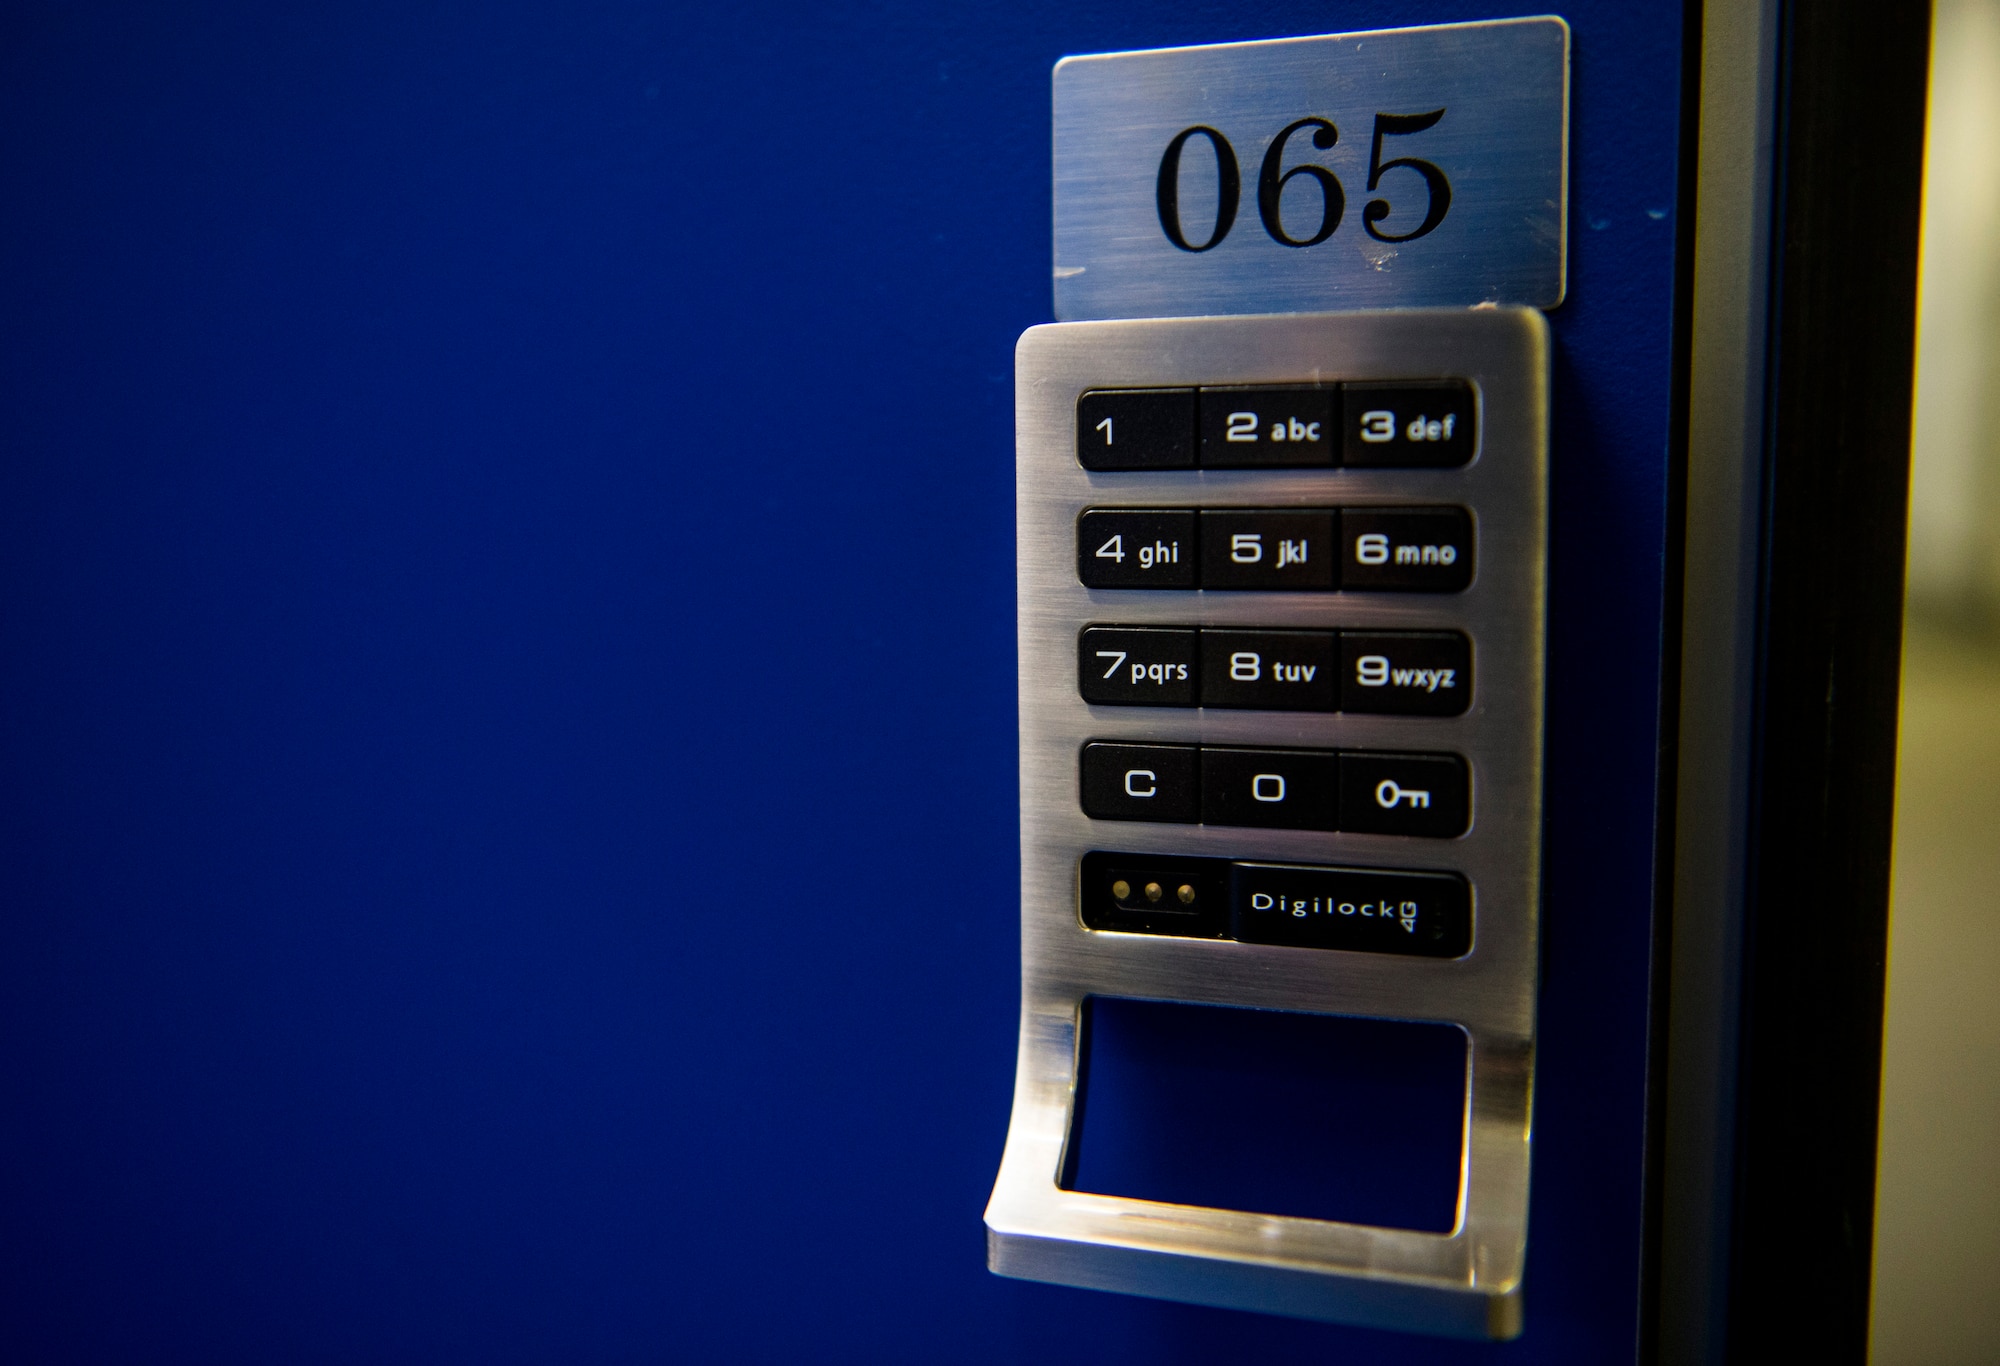 A new keypad lock system displays itself on the outside of a locker door at the Powerhaus Fitness Center on Spangdahlem Air Base, Germany, Jan. 27, 2016. The 52nd Force Support Squadron recently installed keypad lock systems to locker doors at the fitness center. (U.S. Air Force photo by Airman 1st Class Luke Kitterman/Released)  